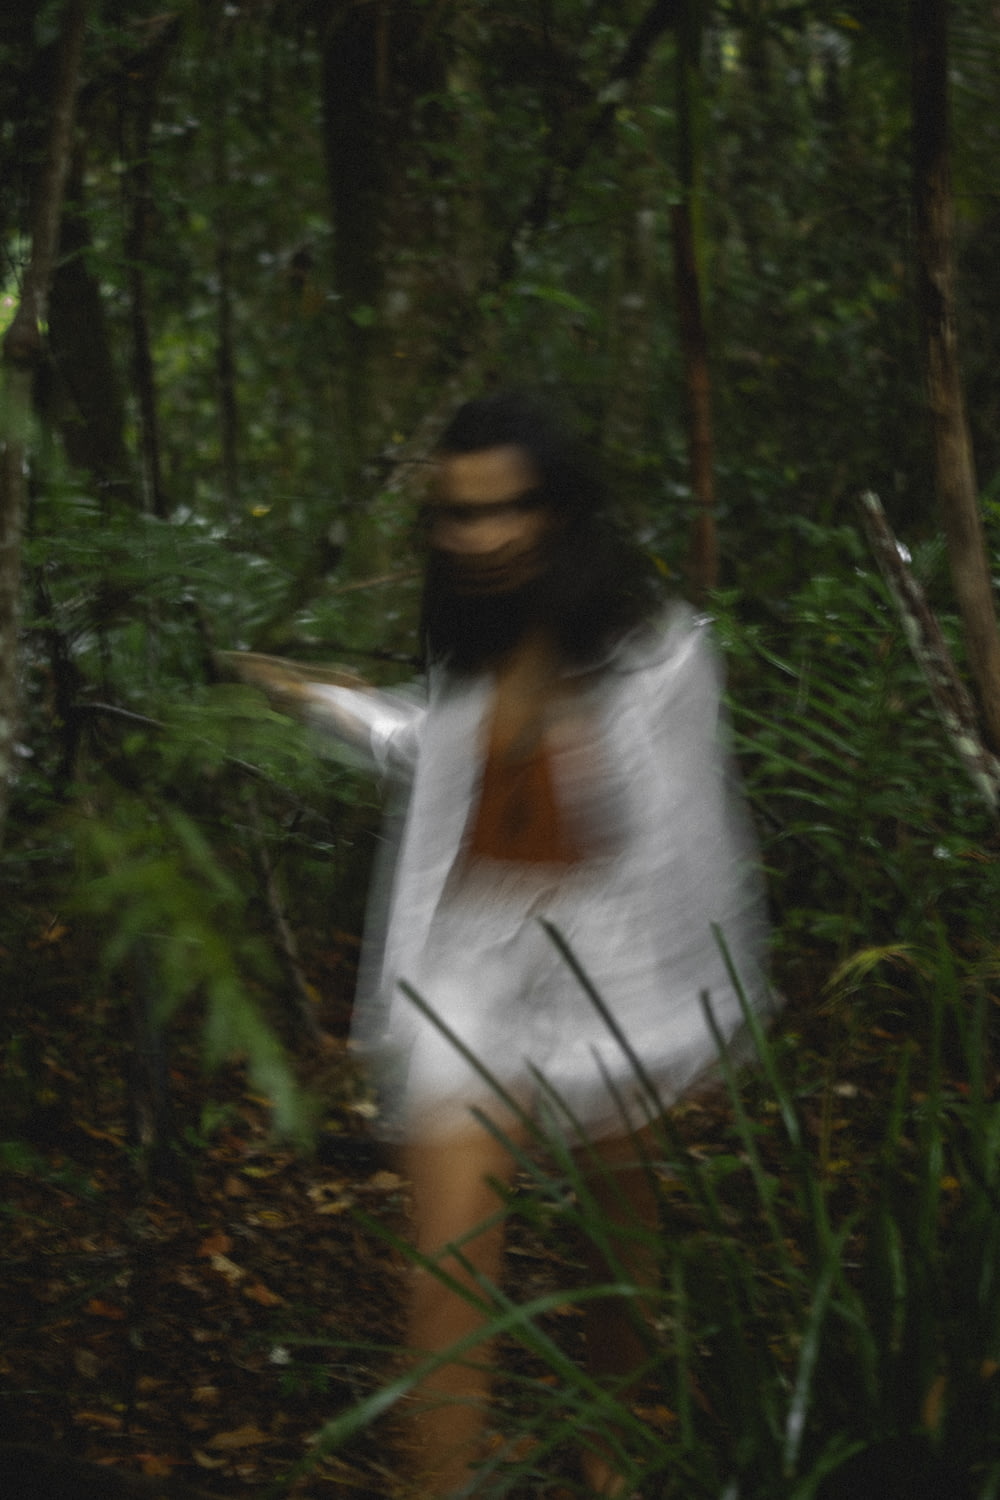 a blurry image of a woman walking through a forest